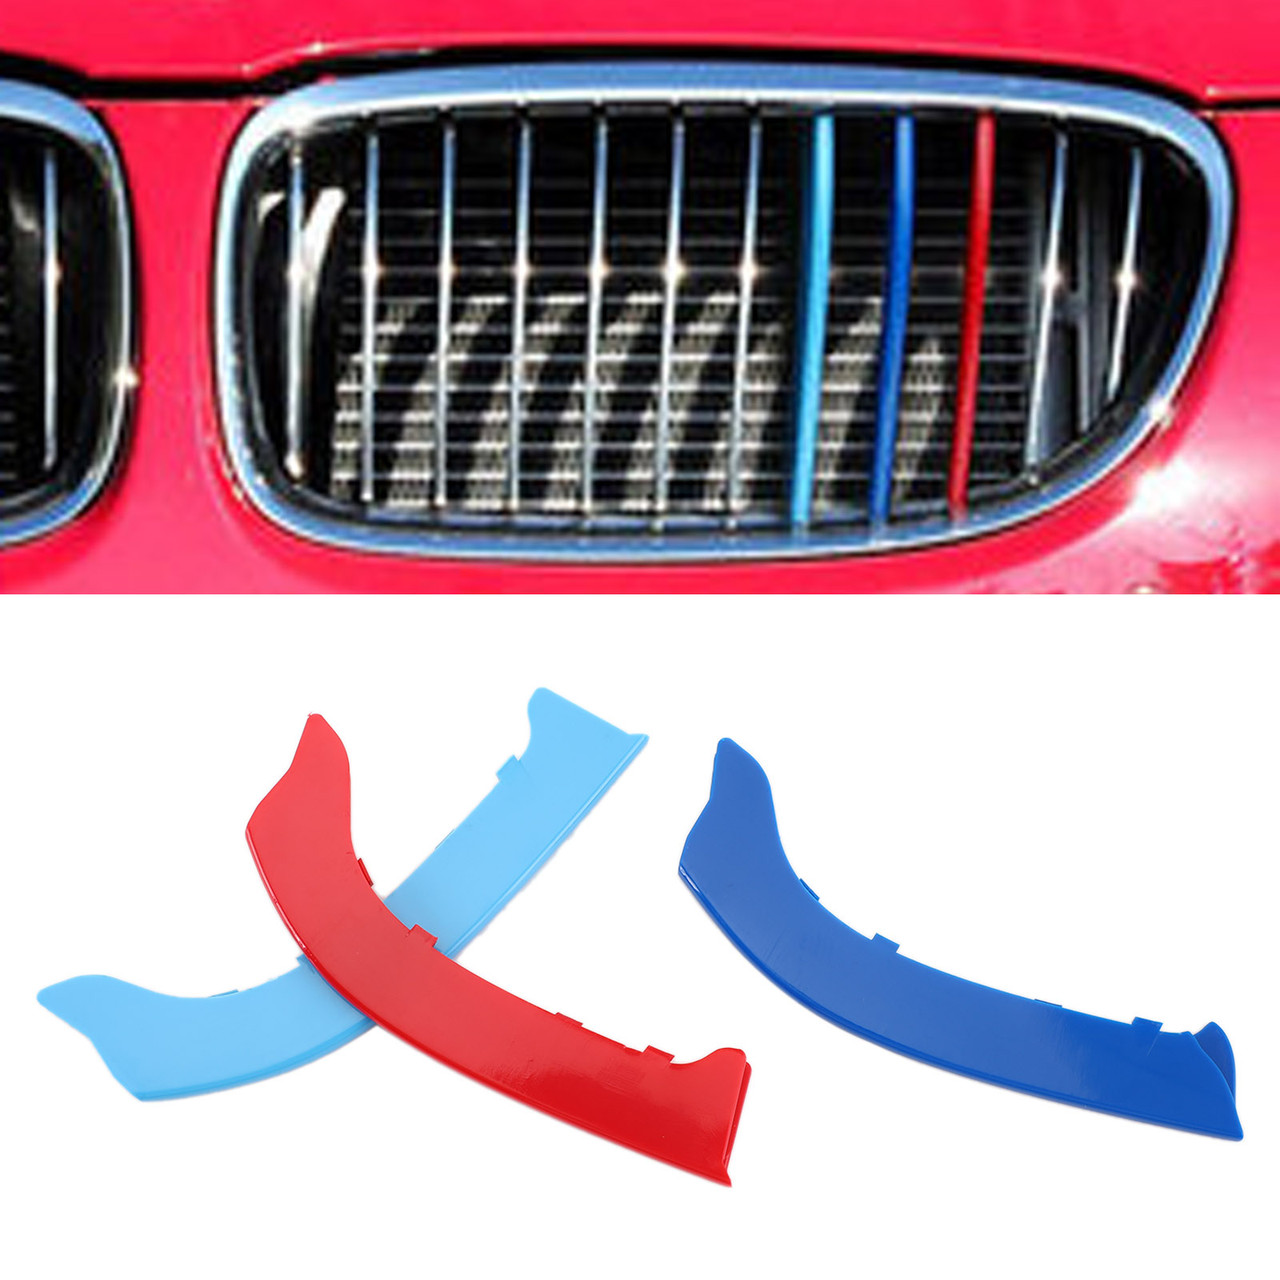 Tri-Colour Front Grille Grill Cover Strips Clip Trim for BMW 3 Series 2009-2012